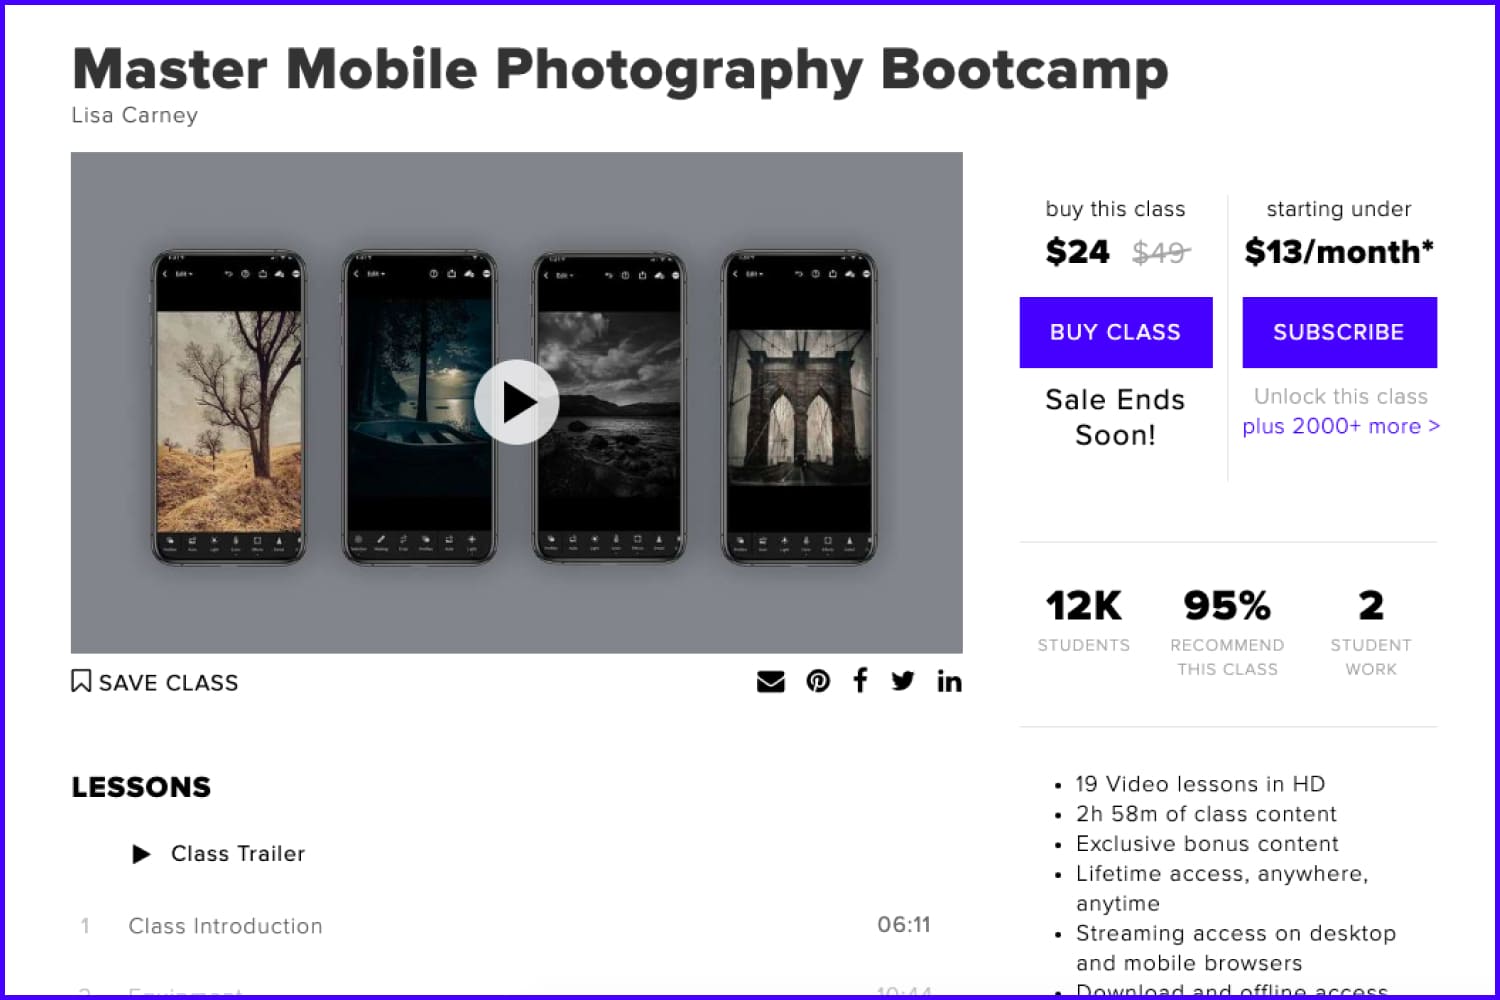 Screenshot of the main page of the Master Mobile Photography Bootcamp website.